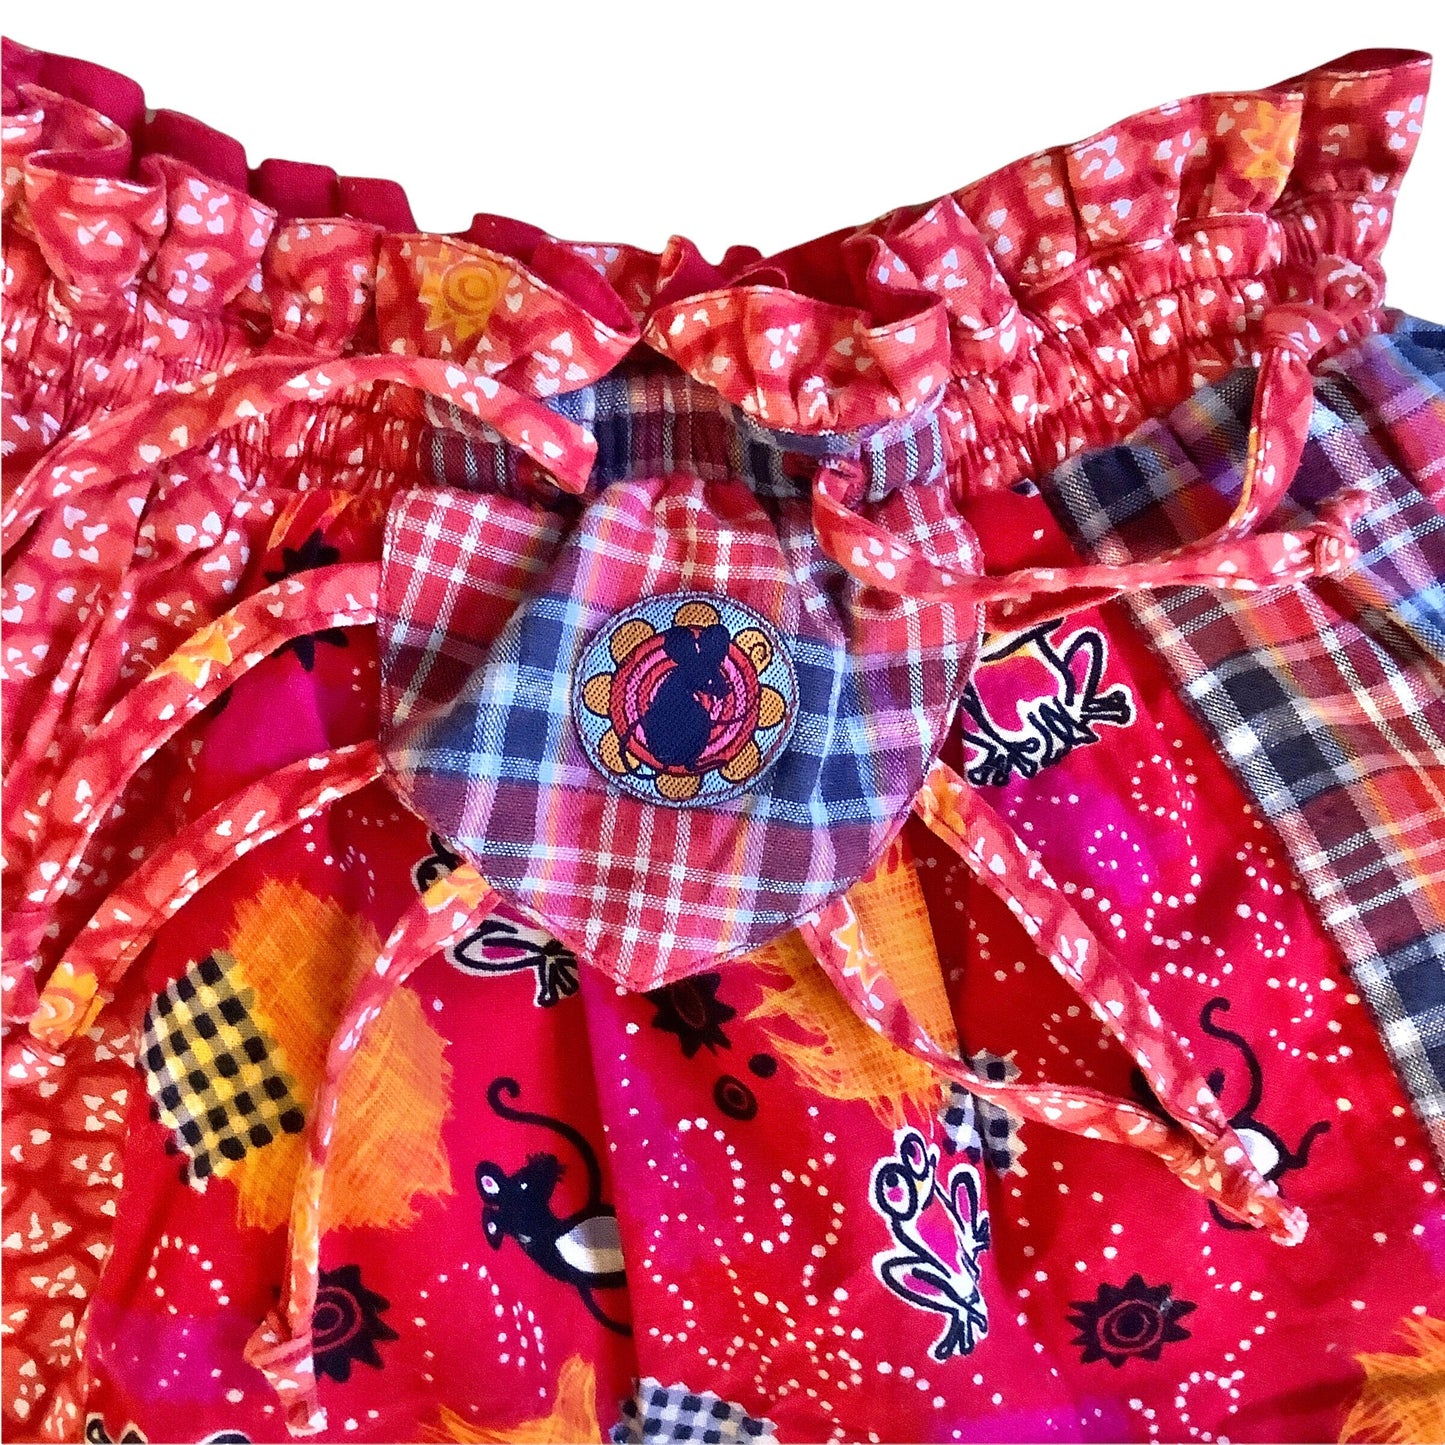 French Vintage 80s Red Printed Girl's Skirt / 5-6Y